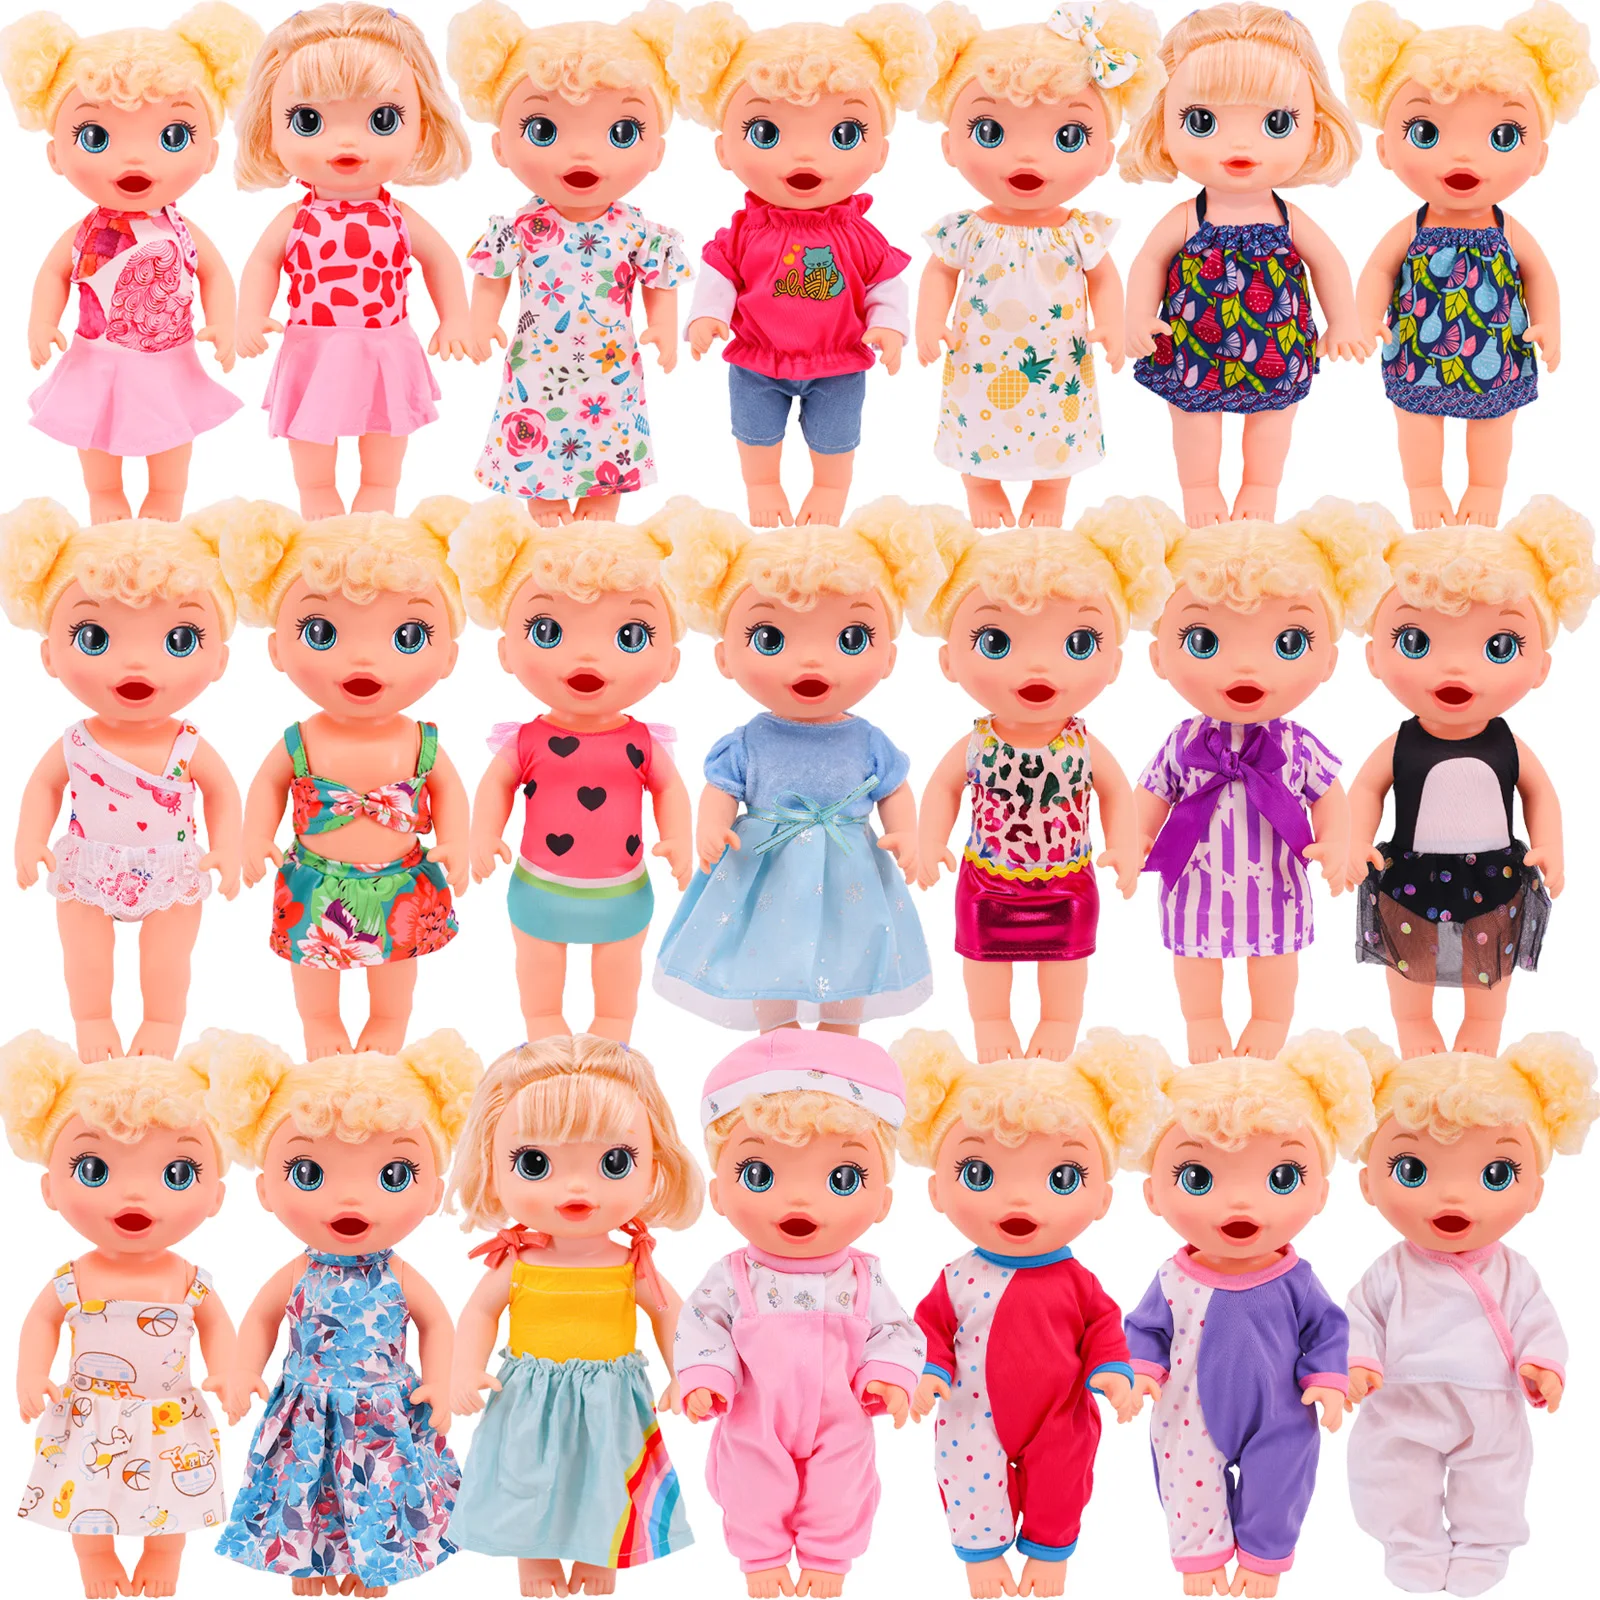 Doll Clothes For 12Inch Alive Baby Doll Print Cute Suspenders Dress&Siamese Suit Accessories,Only Sell Clothes